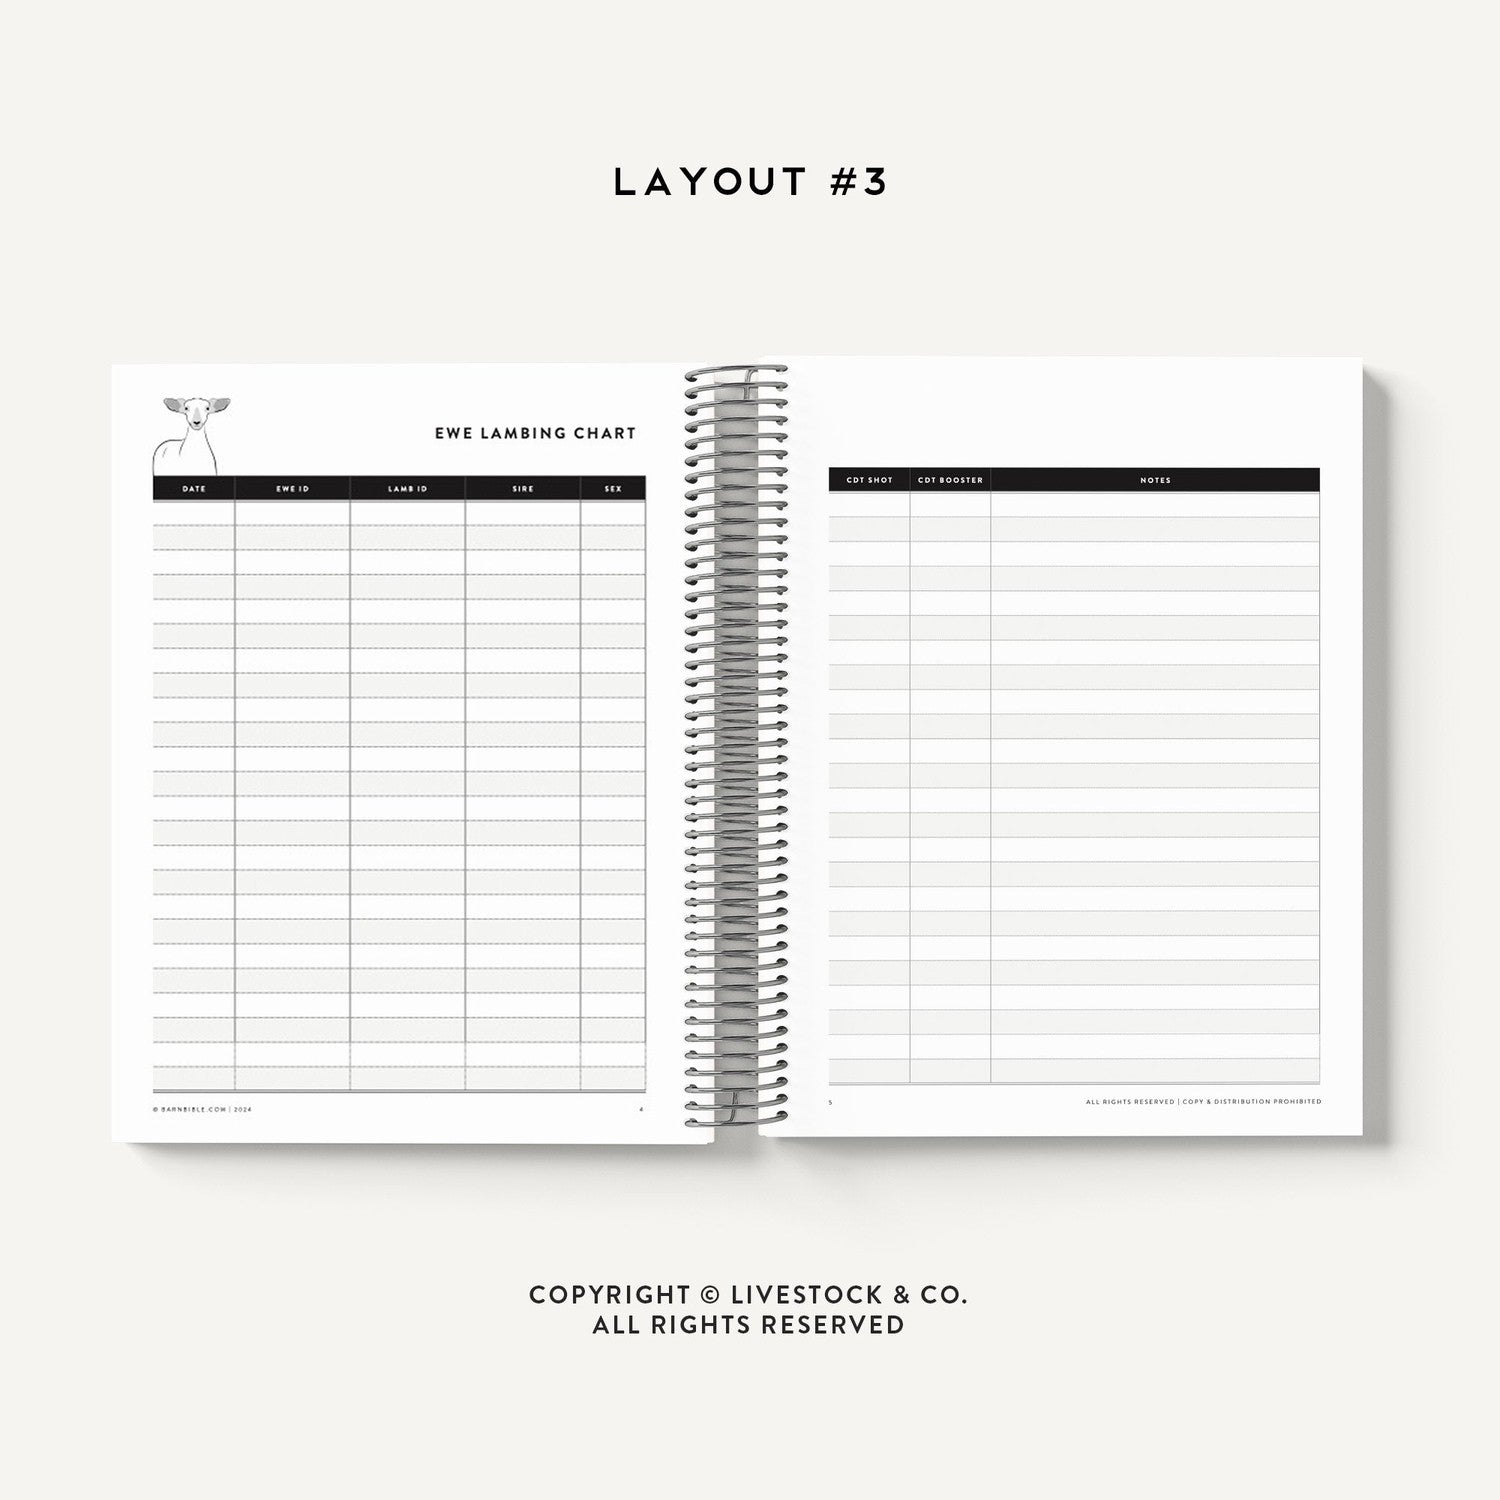 Personalized-Livestock-Lambing Record Planner - Solid Cover